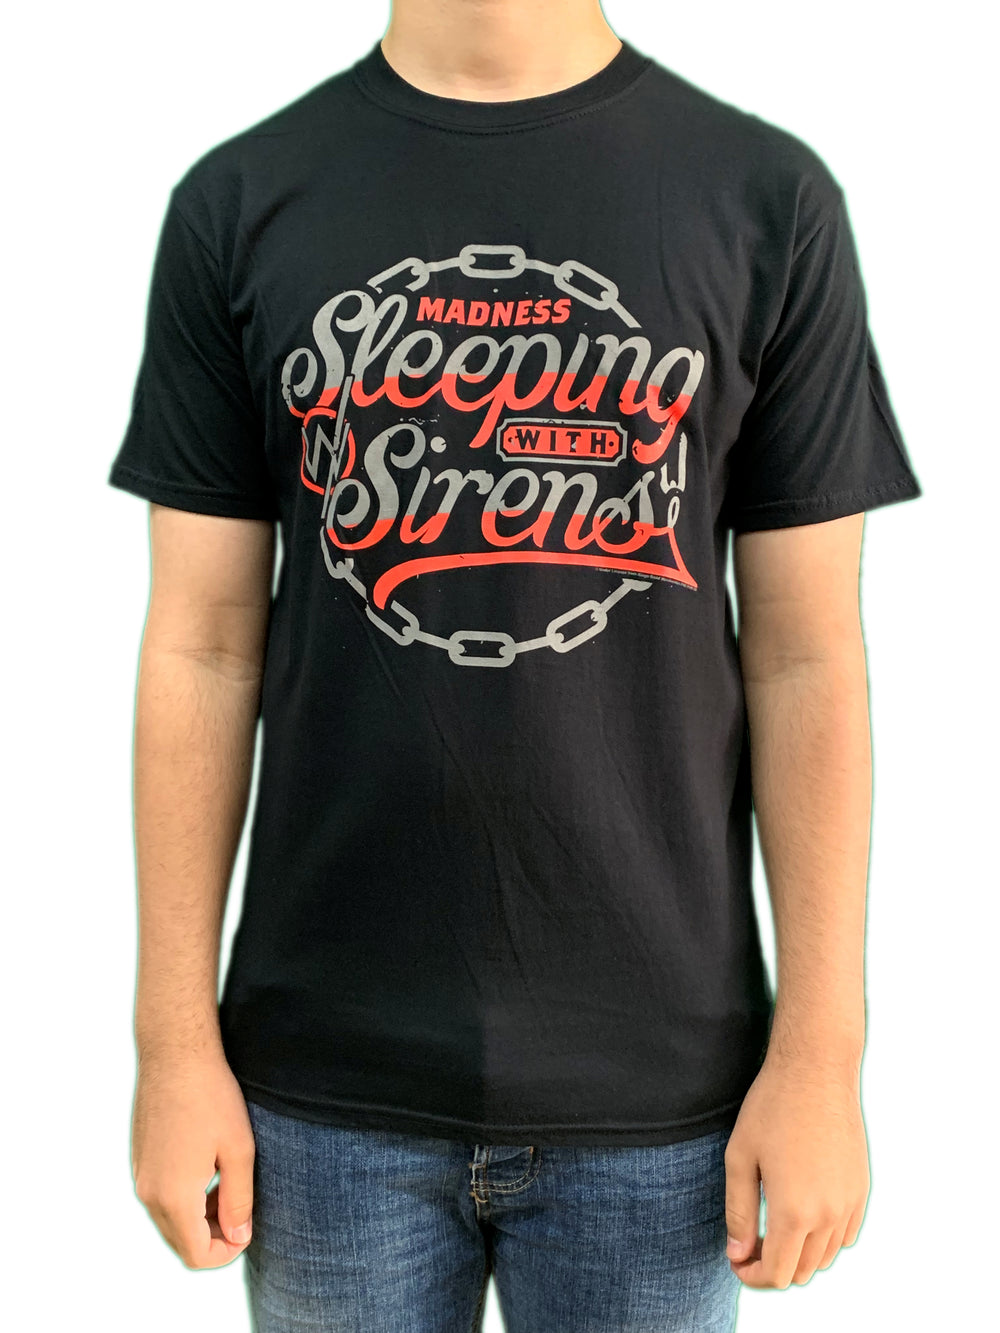 Sleeping With Sirens Madness Text Unisex Official T Shirt Brand New Various Sizes